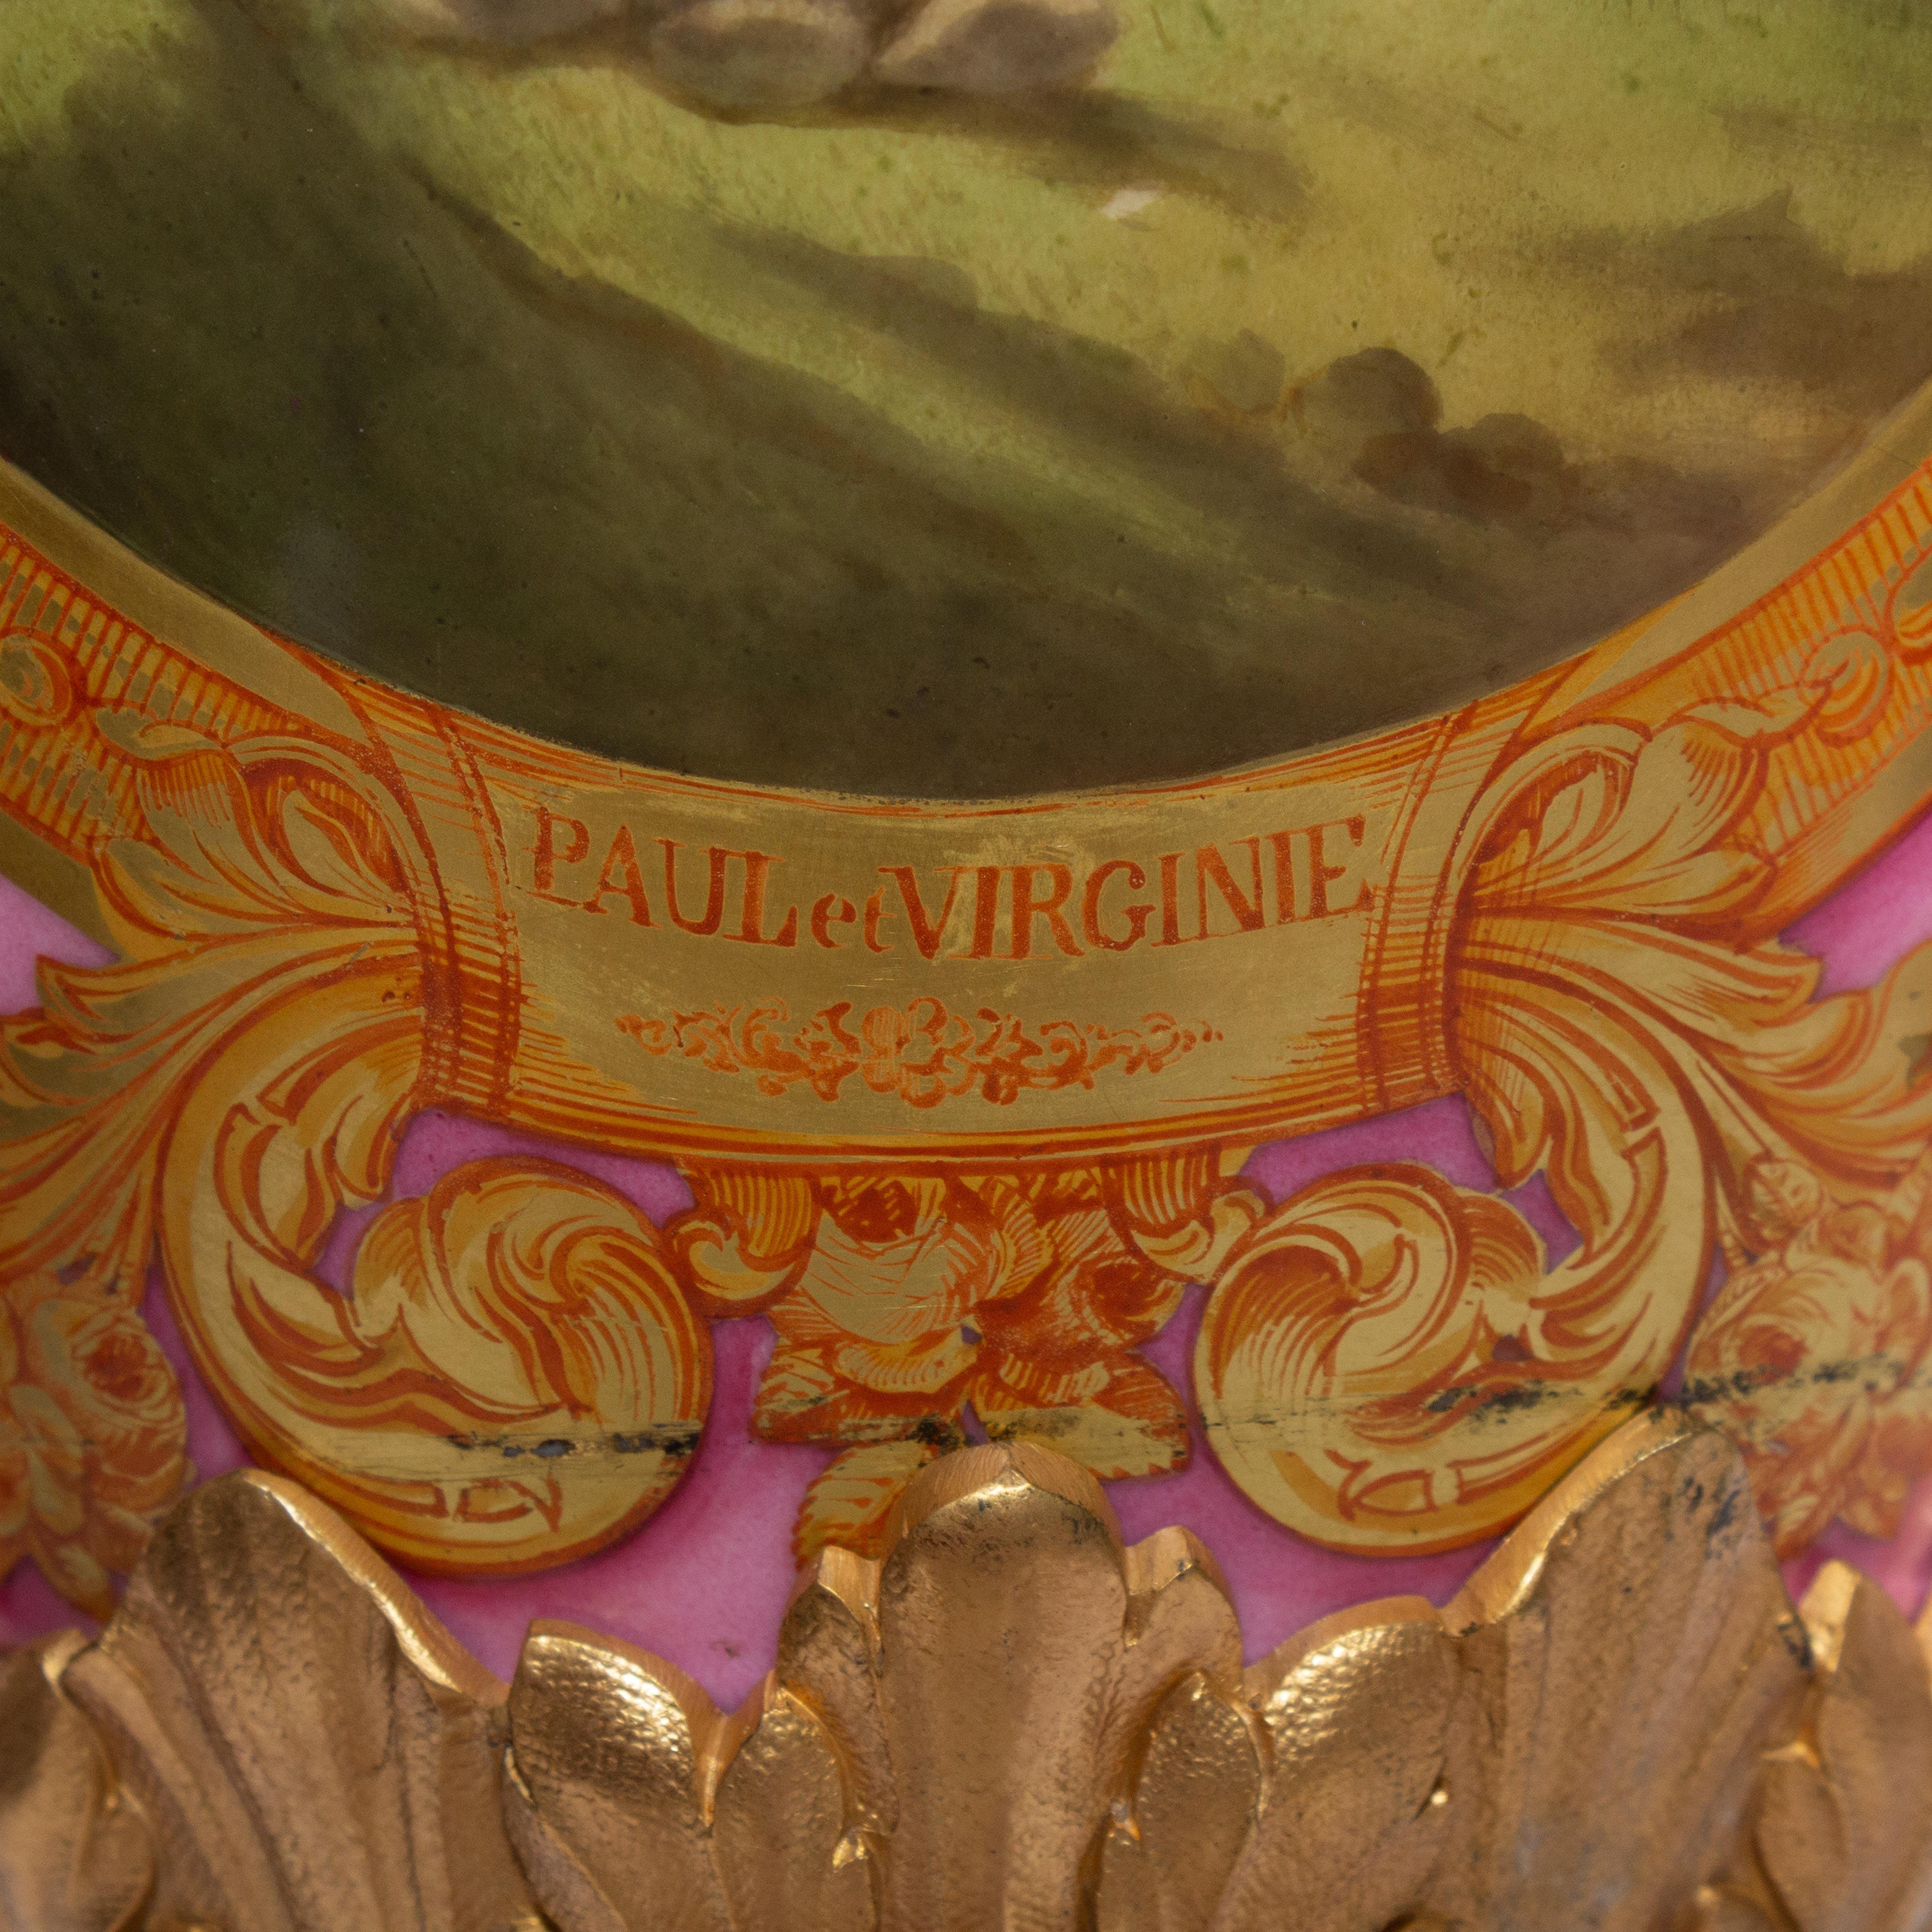 A magnificent Louis Philippe period Sevres ormolu mounted vase, circa 1847.
Handles are serpents holding an apple in their mouth, referring perhaps to Adam and Eve. A beautifully painted scene in the front depicts the story of Paul and Virginie